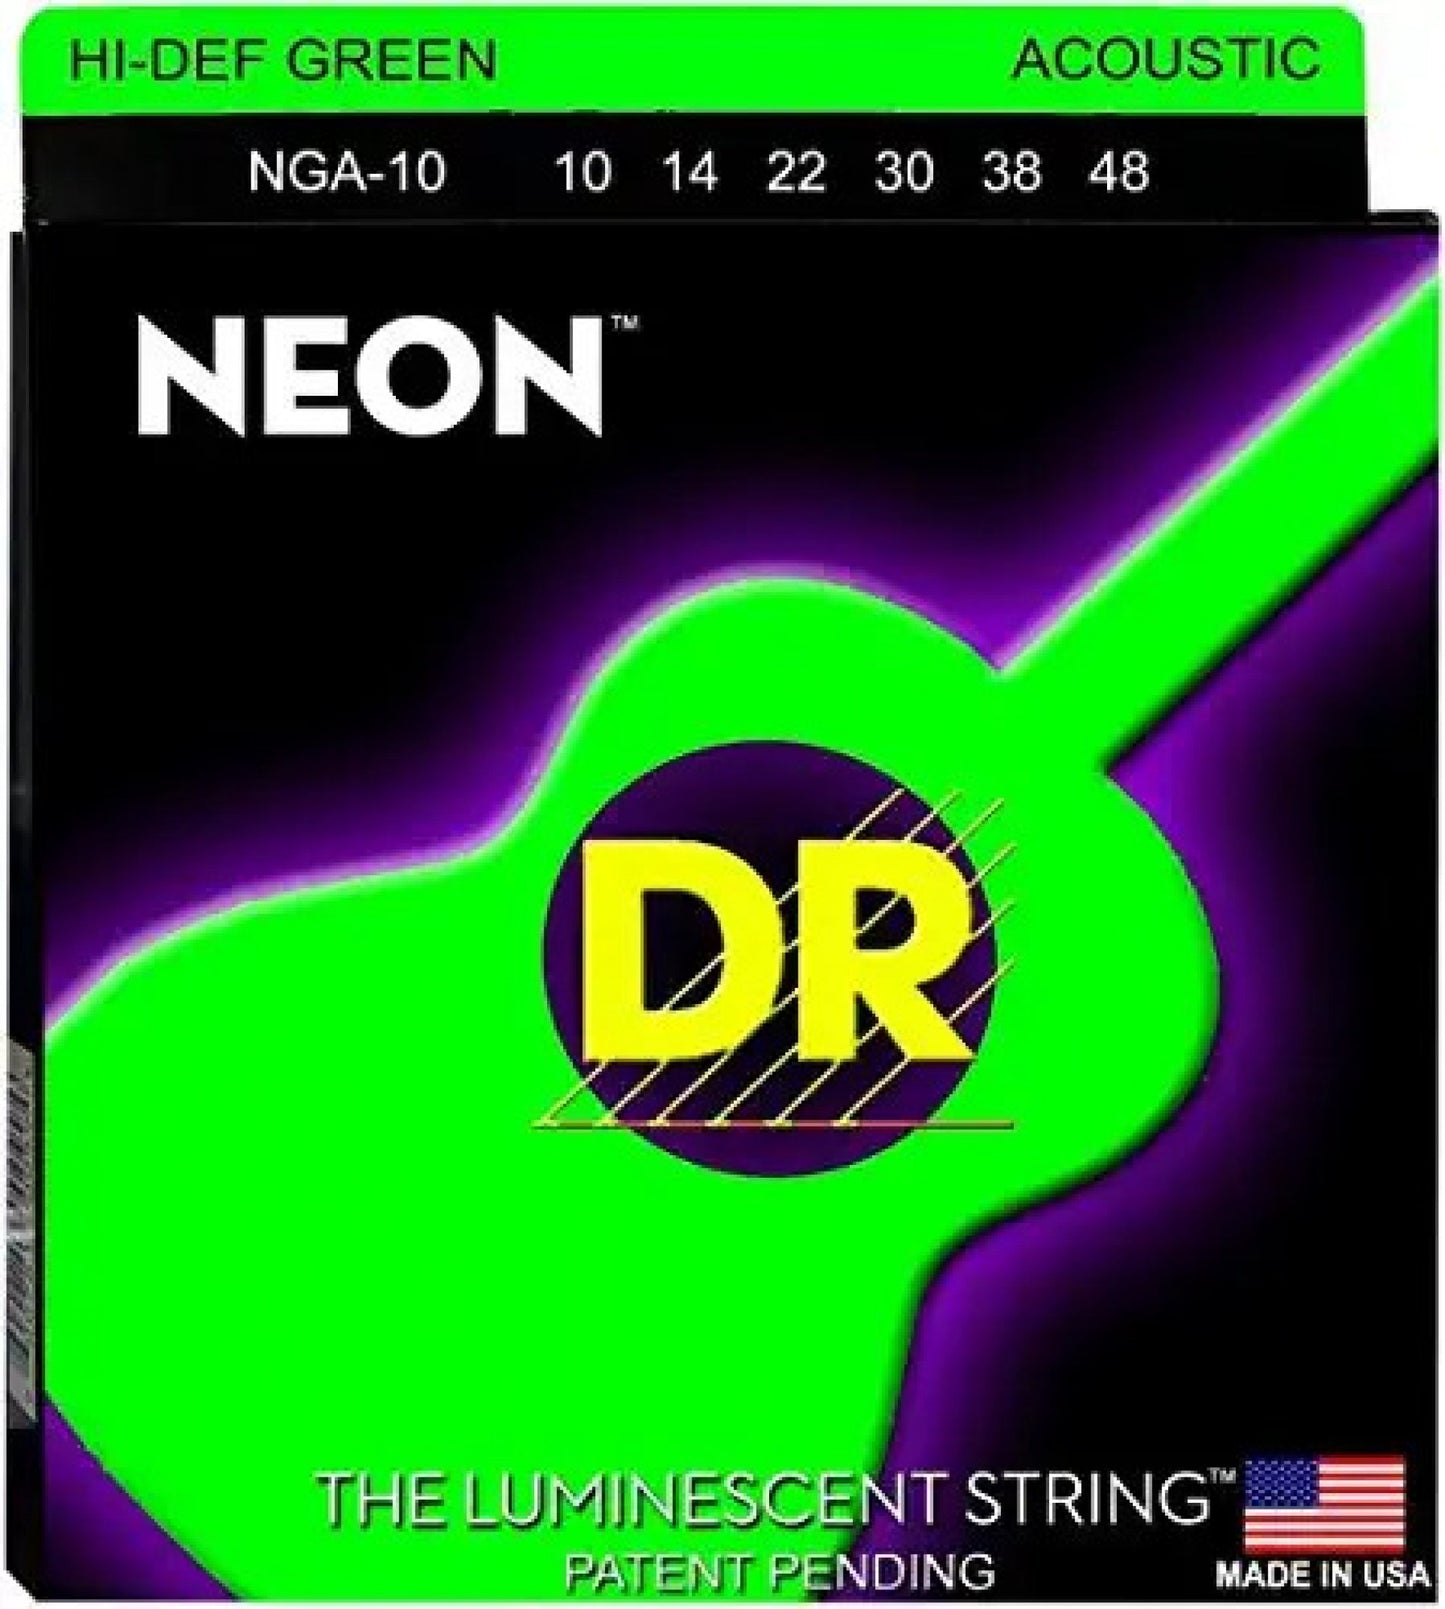 DR Strings NGA-10 HI-DEF NEON Green Colored Acoustic Guitar Strings 10-48, Extra Light